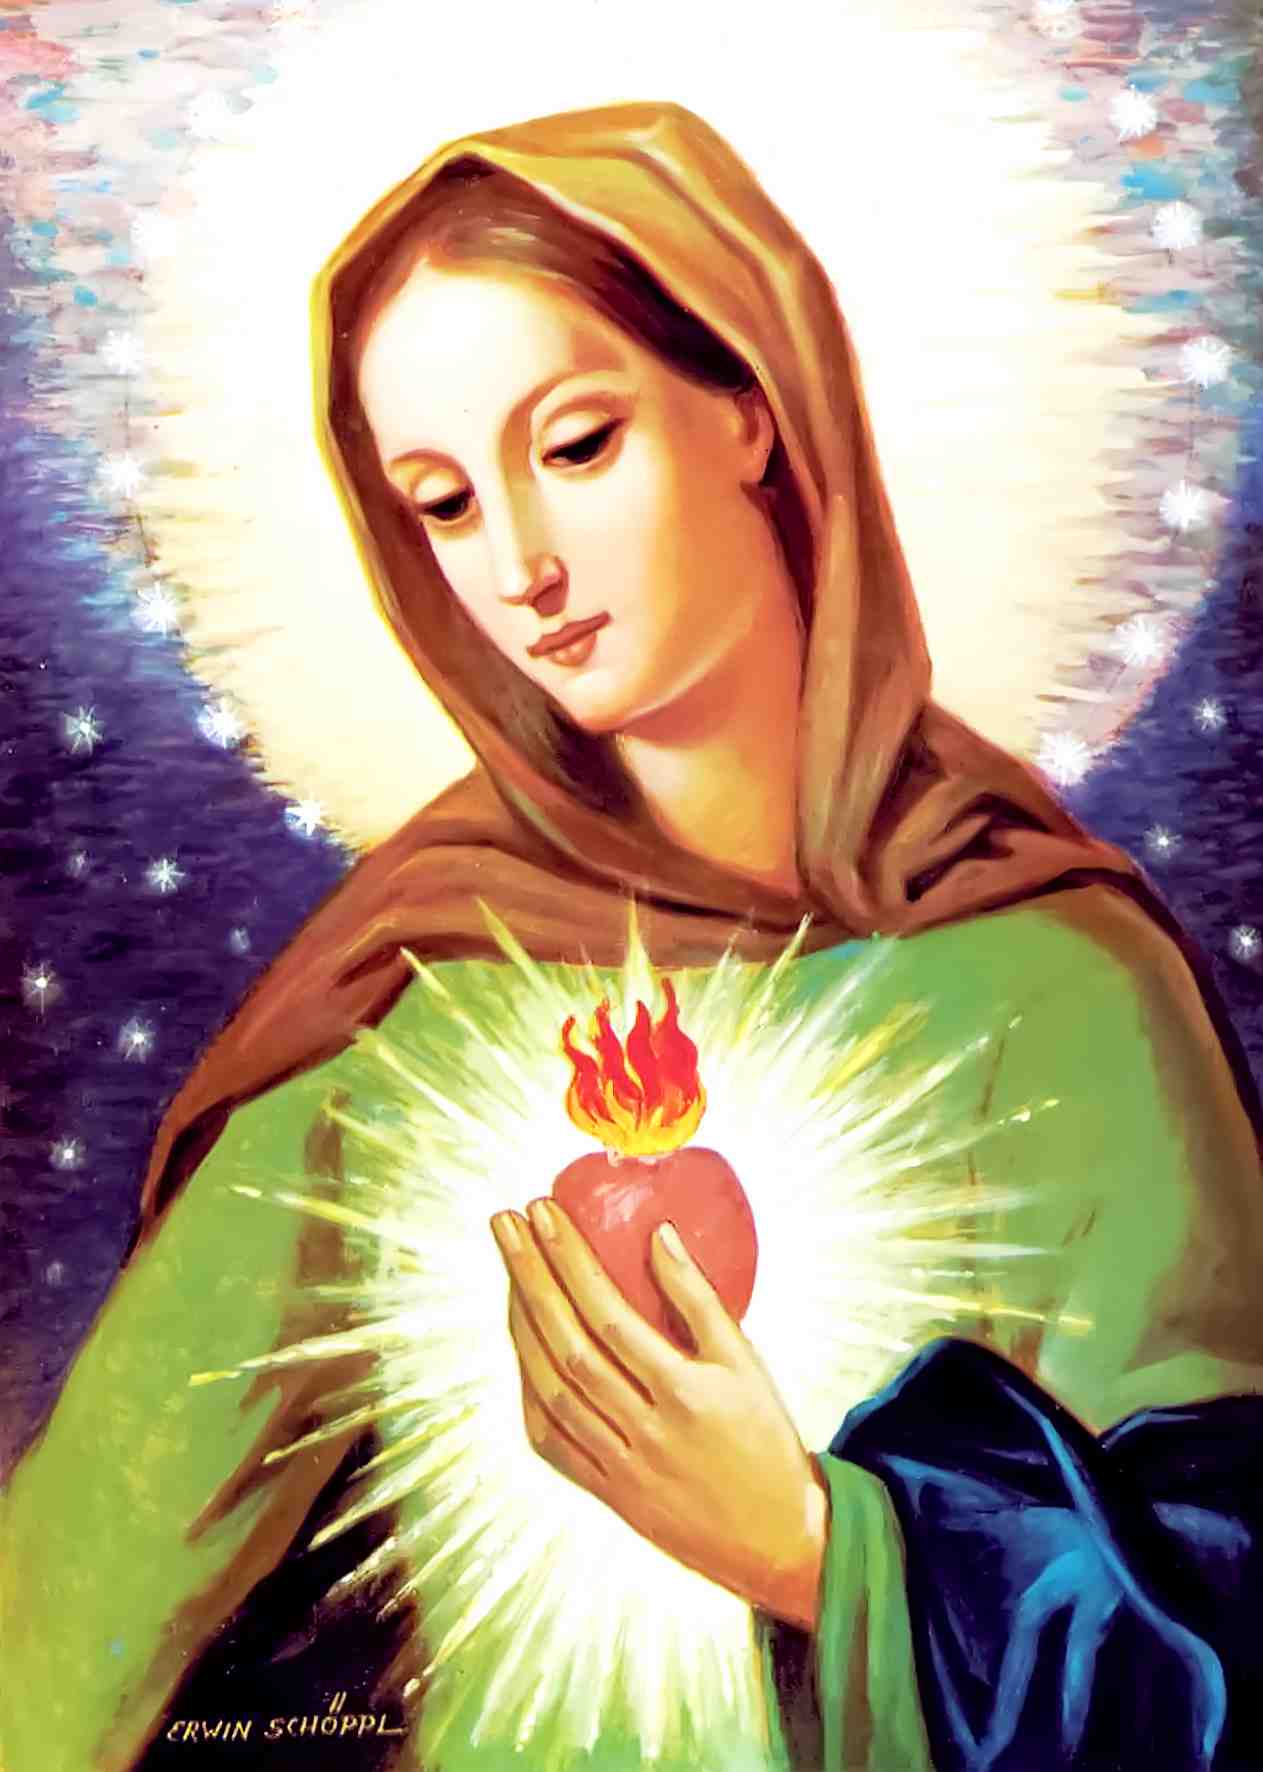 The Flame of Love of the Immaculate Heart of Mary